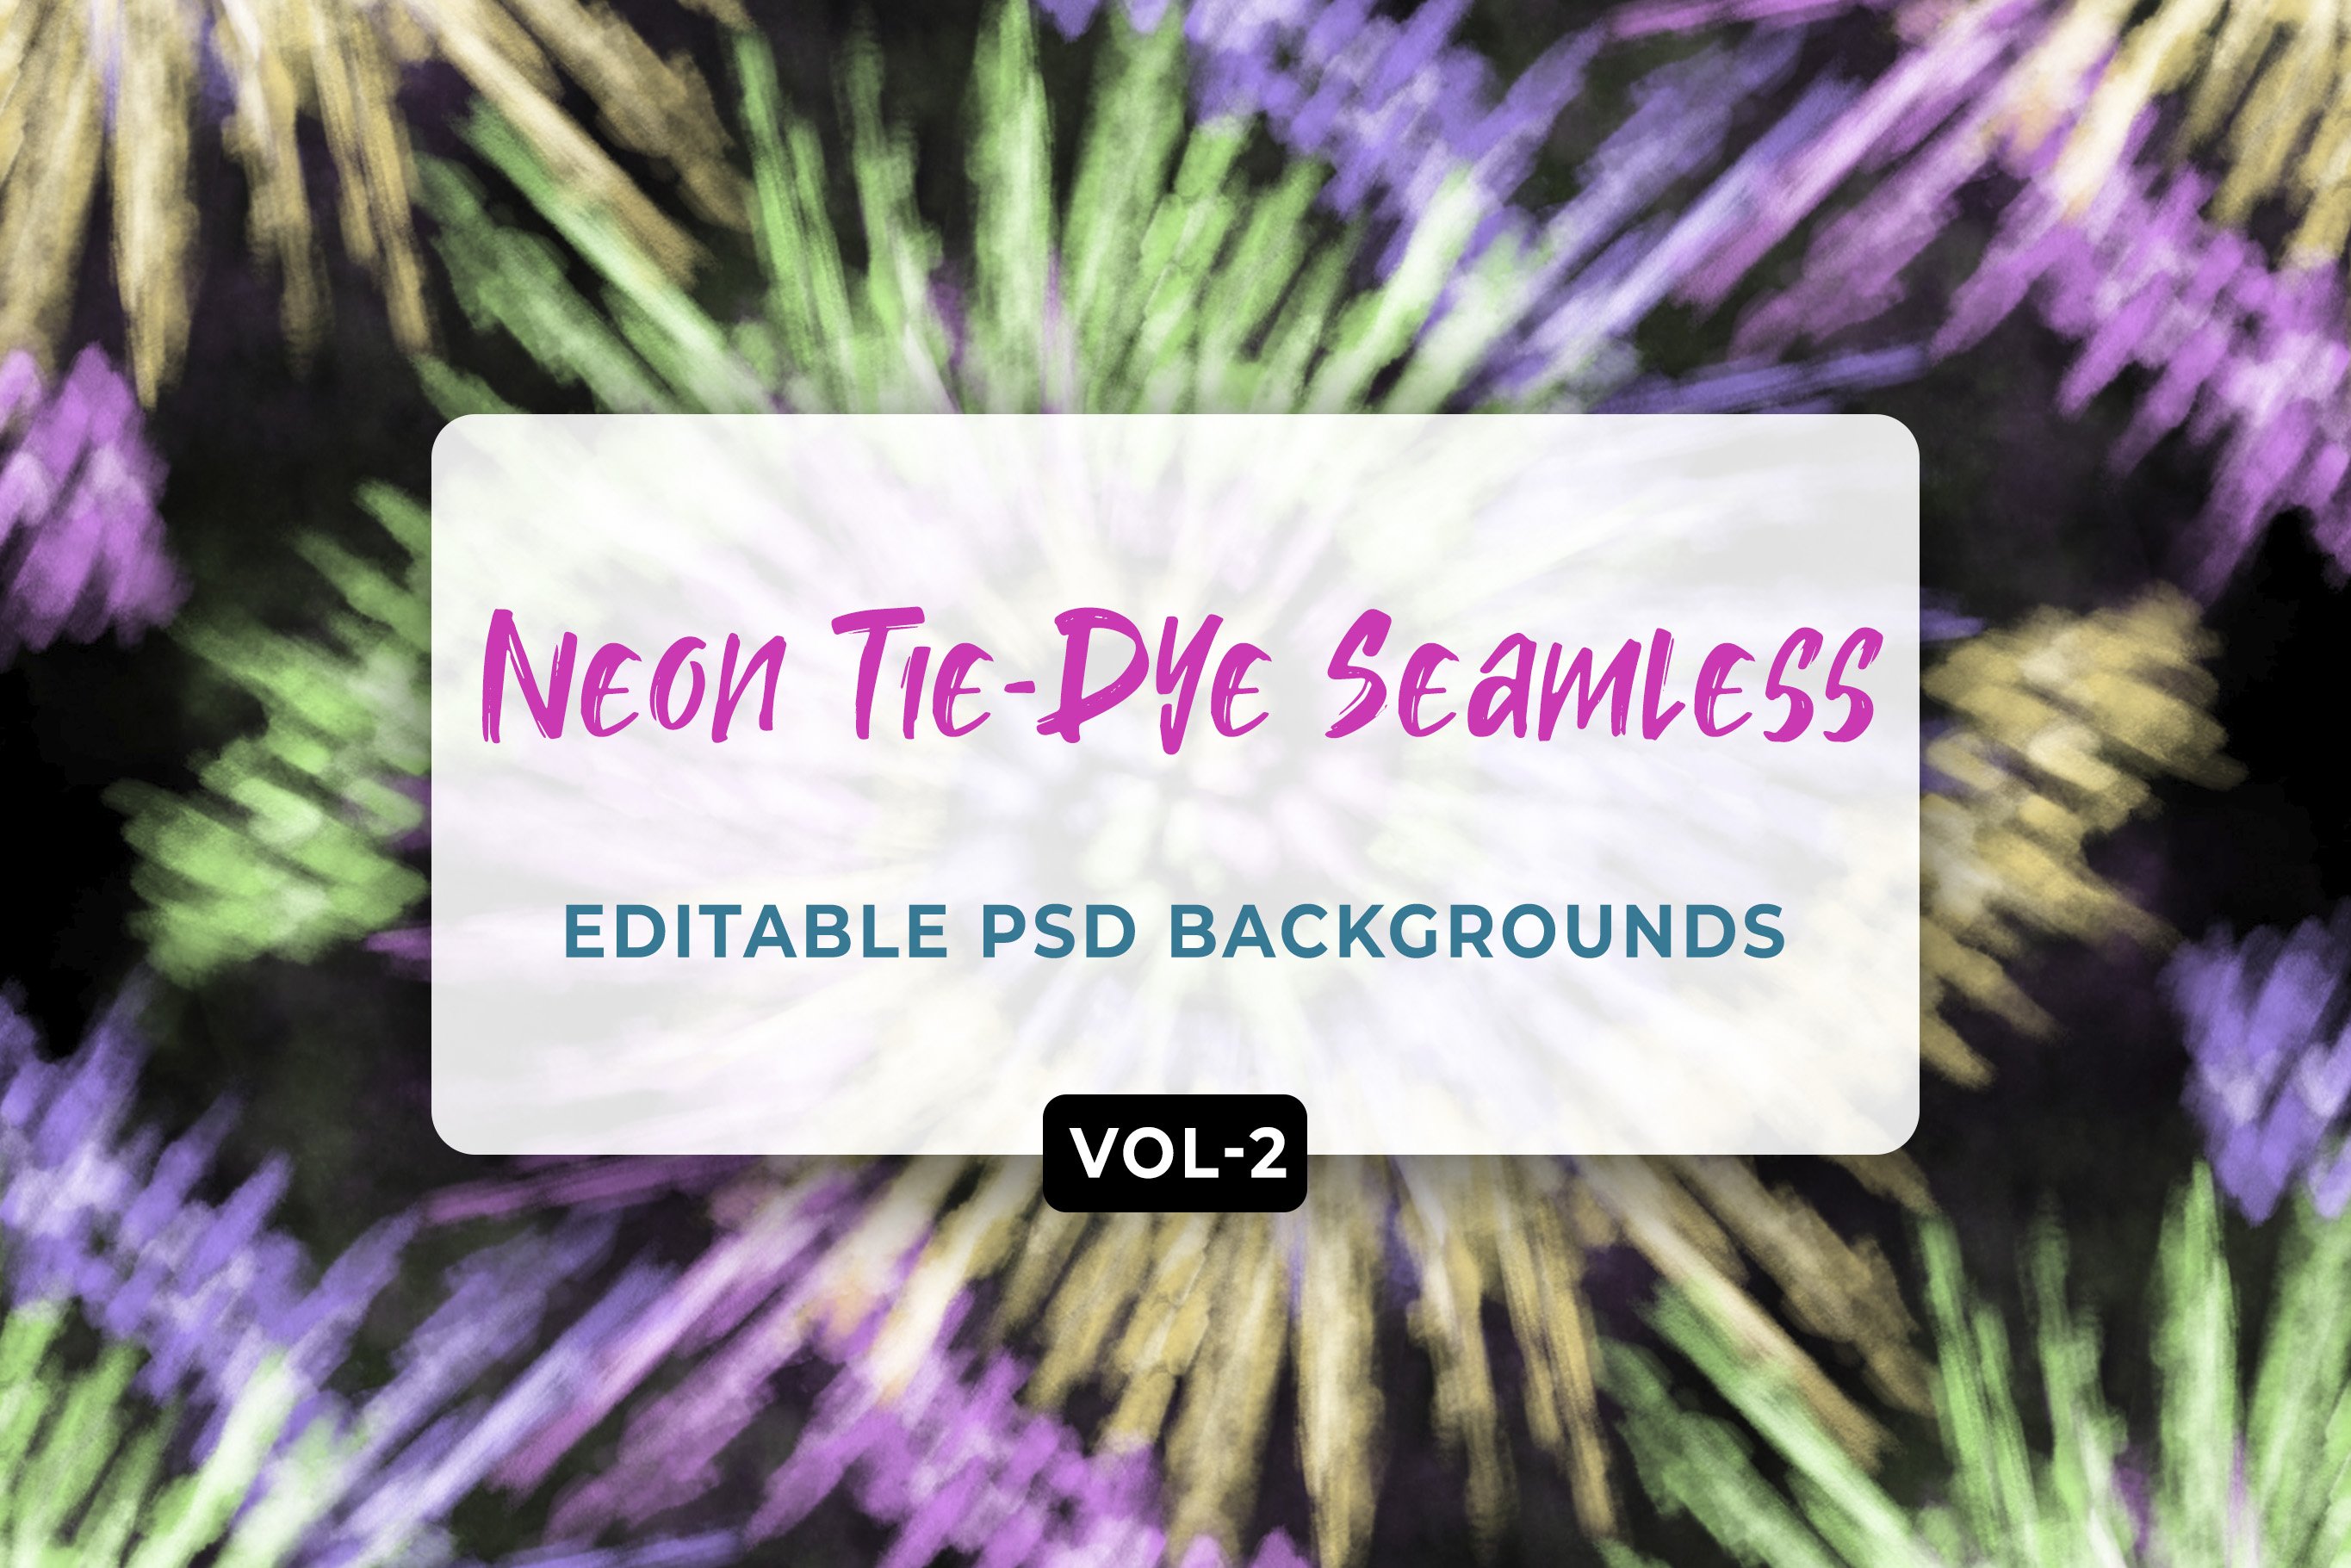 Neon Tie-Dye Seamless Patterns V-02 cover image.